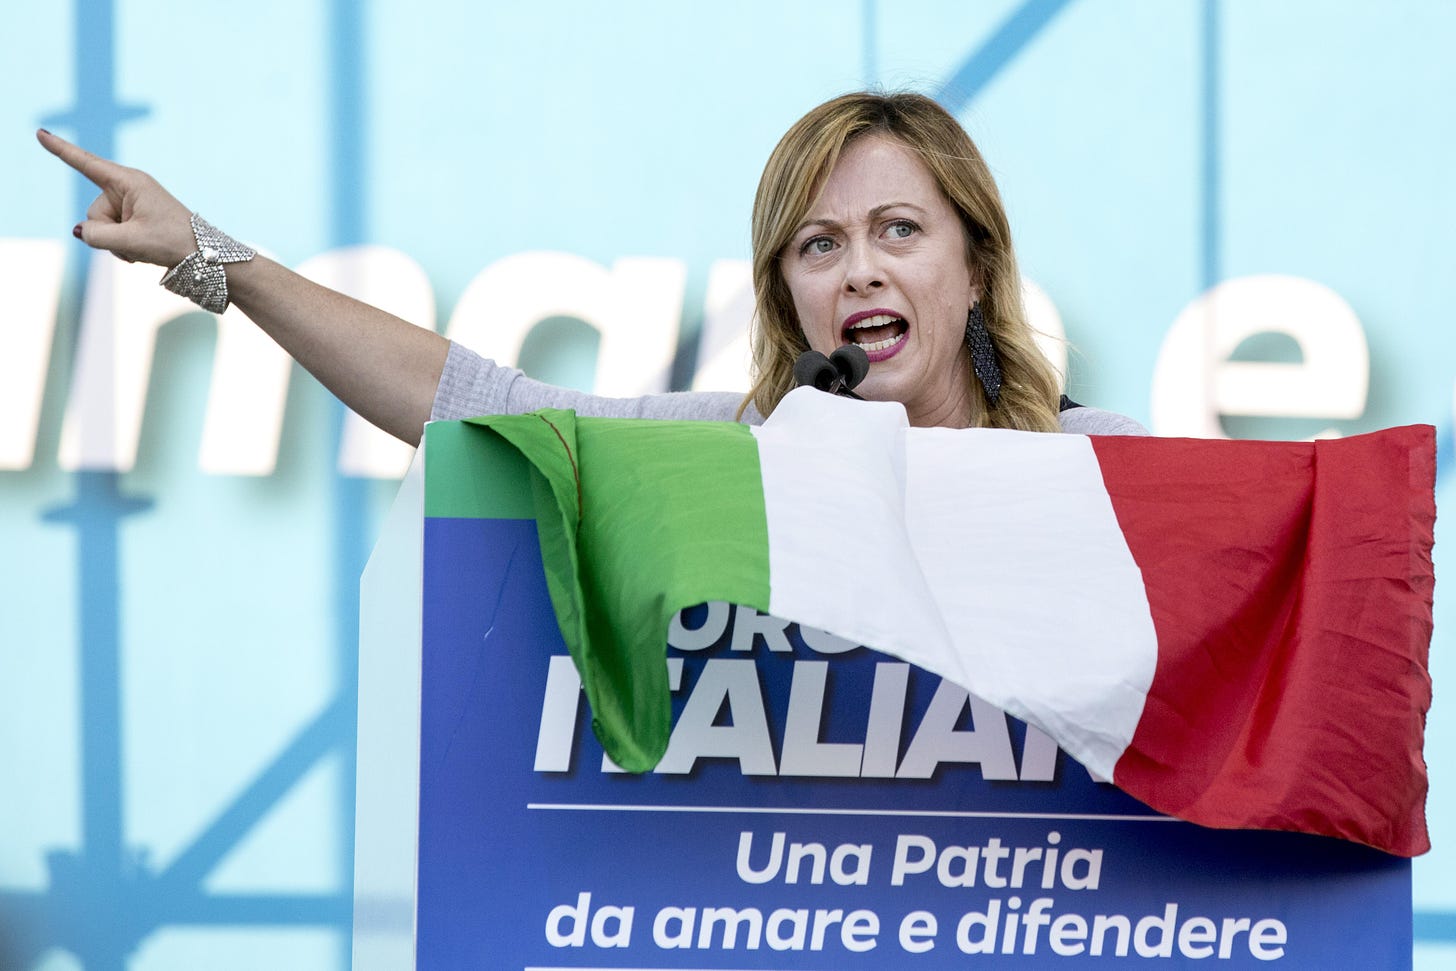 Giorgia Meloni: right-wing populist and unlikely disco star on track to be  Italy's first female prime minister